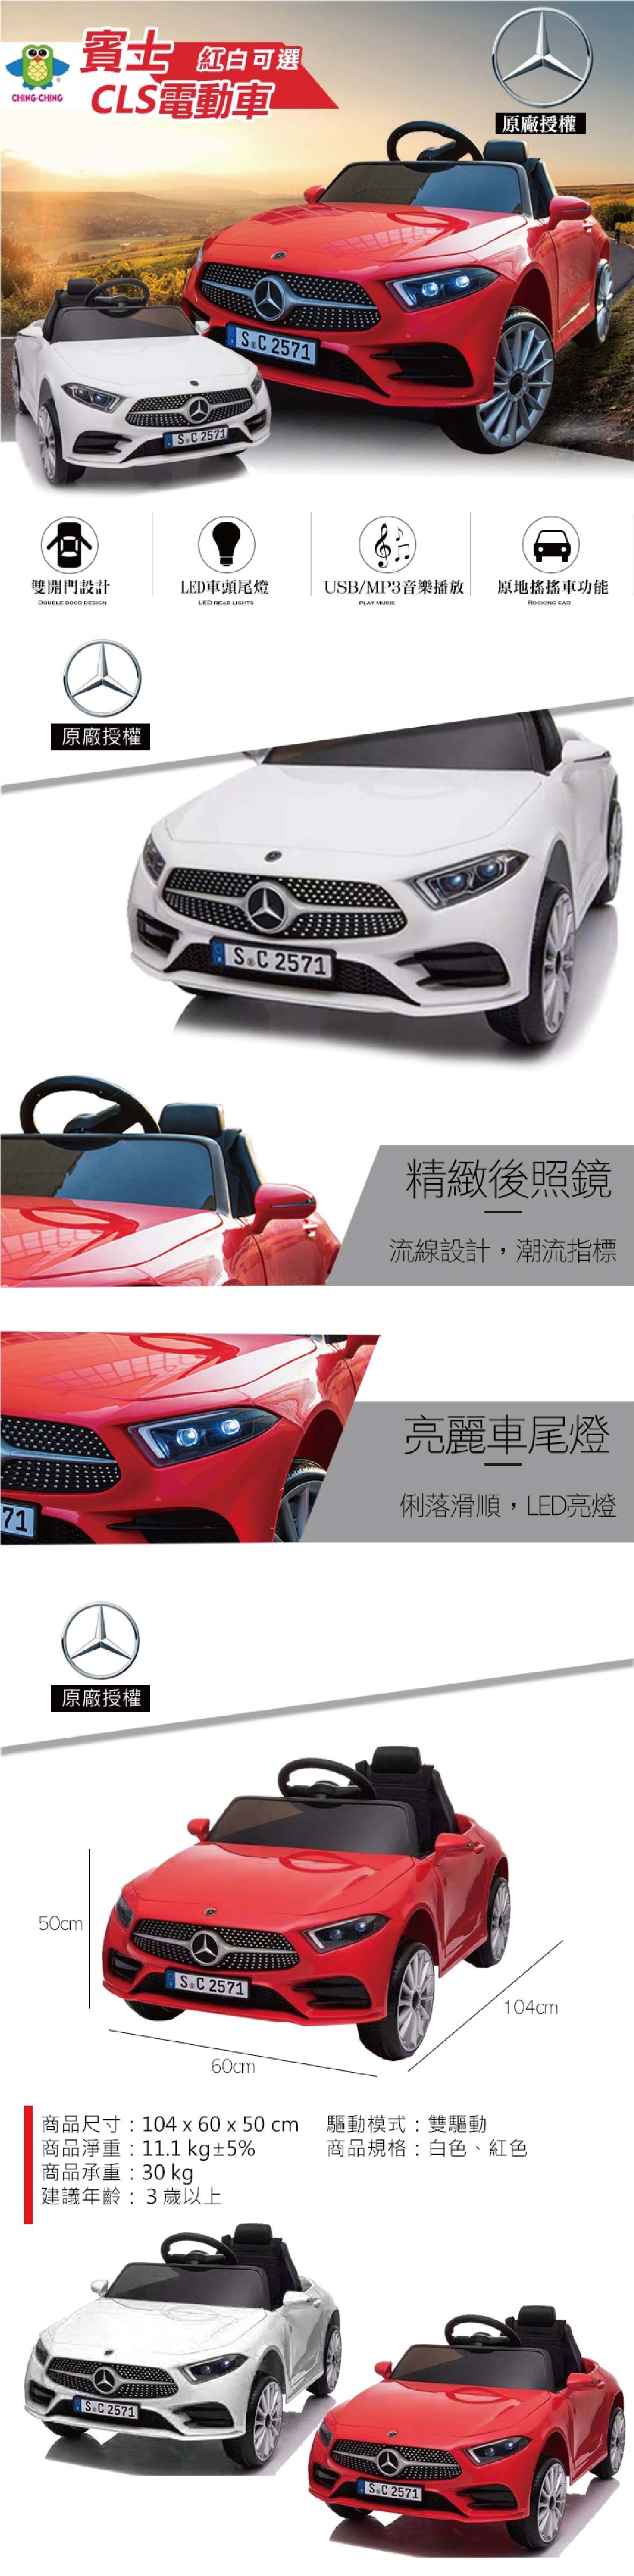 proimages/product/親親原廠授權賓士CLS350電動車(紅白)_RT-1666-04.jpg